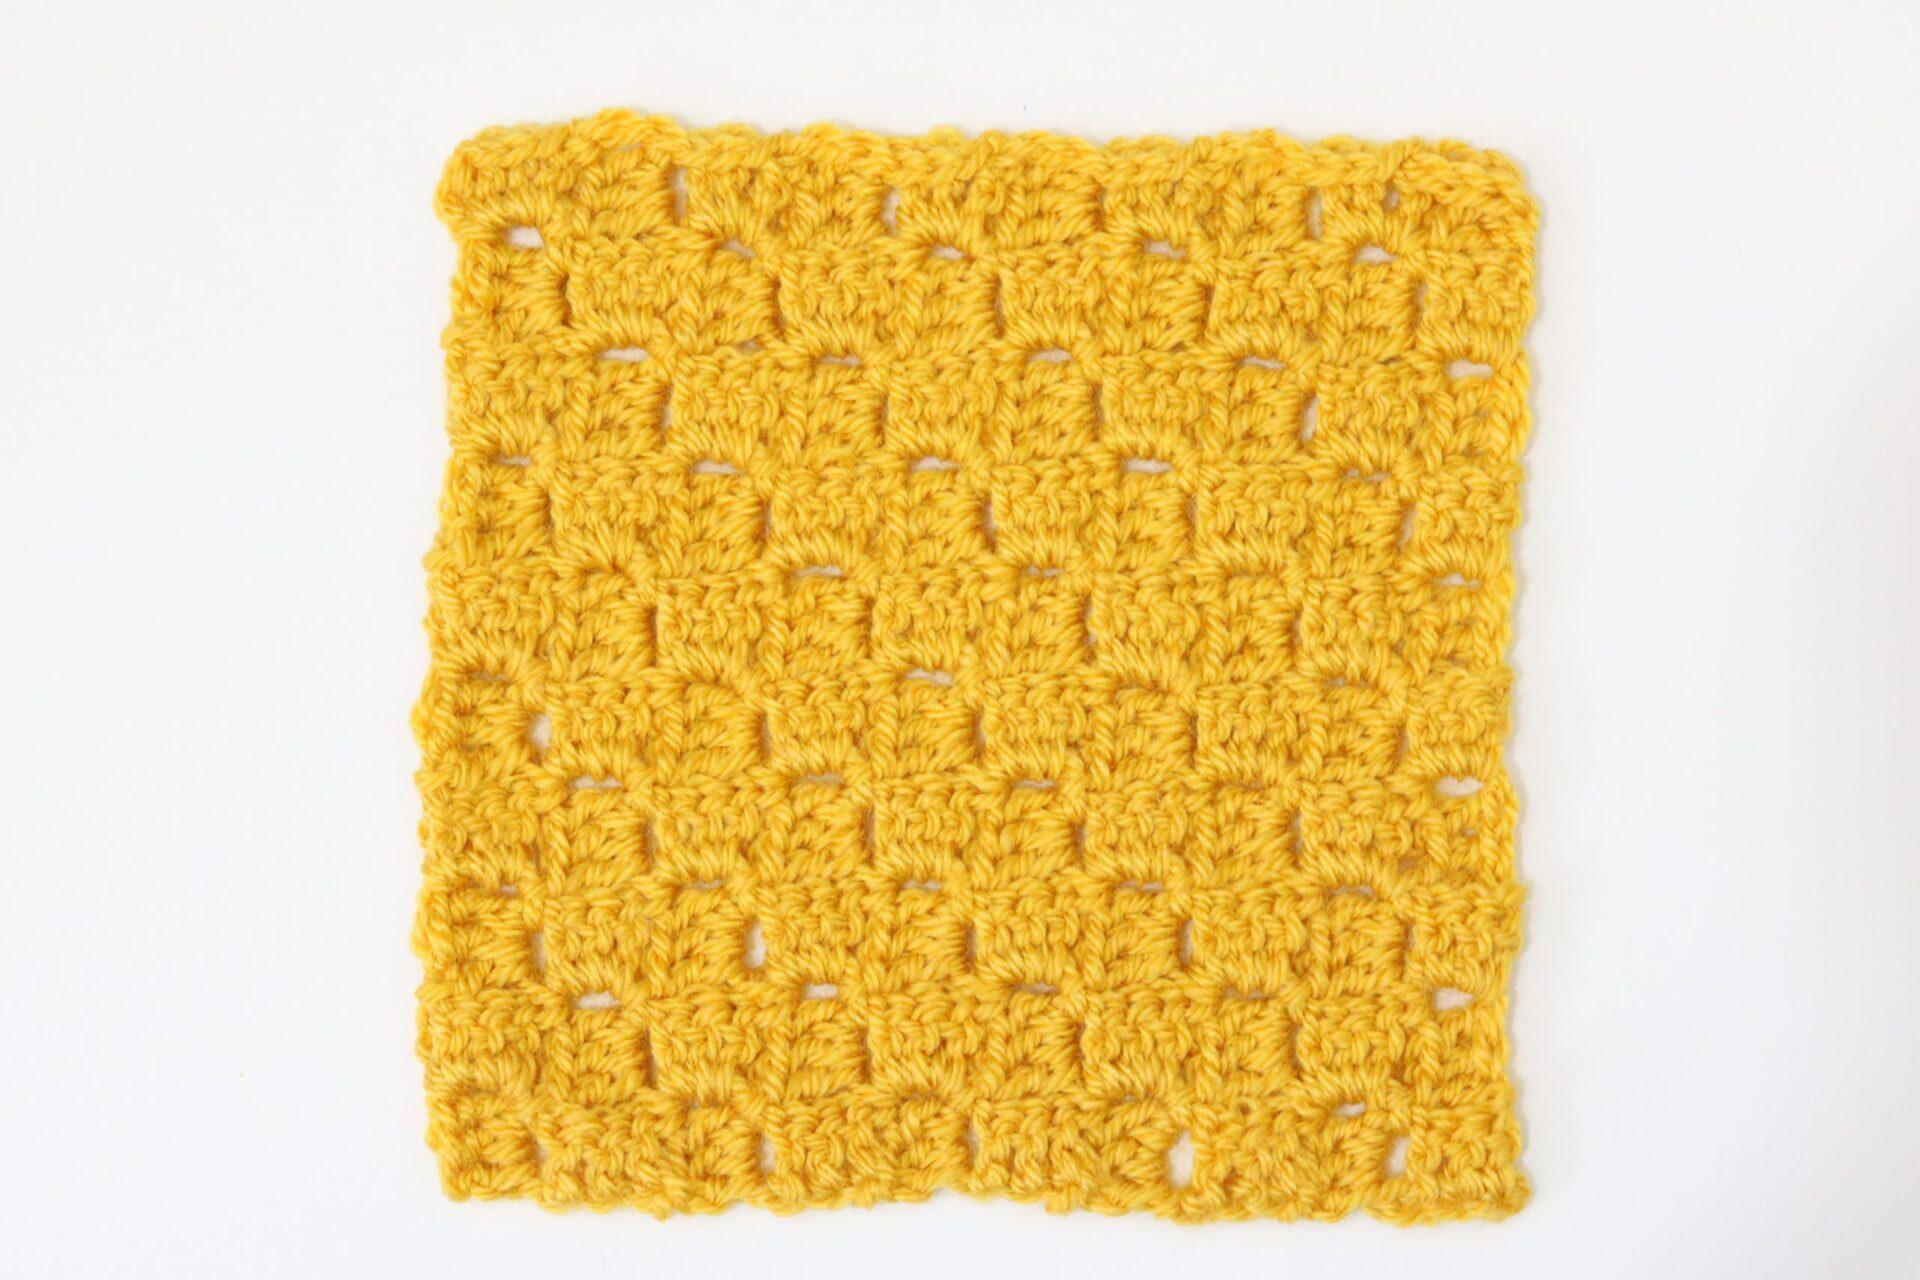 A swatch of corner to corner crochet on a white background made into a square.